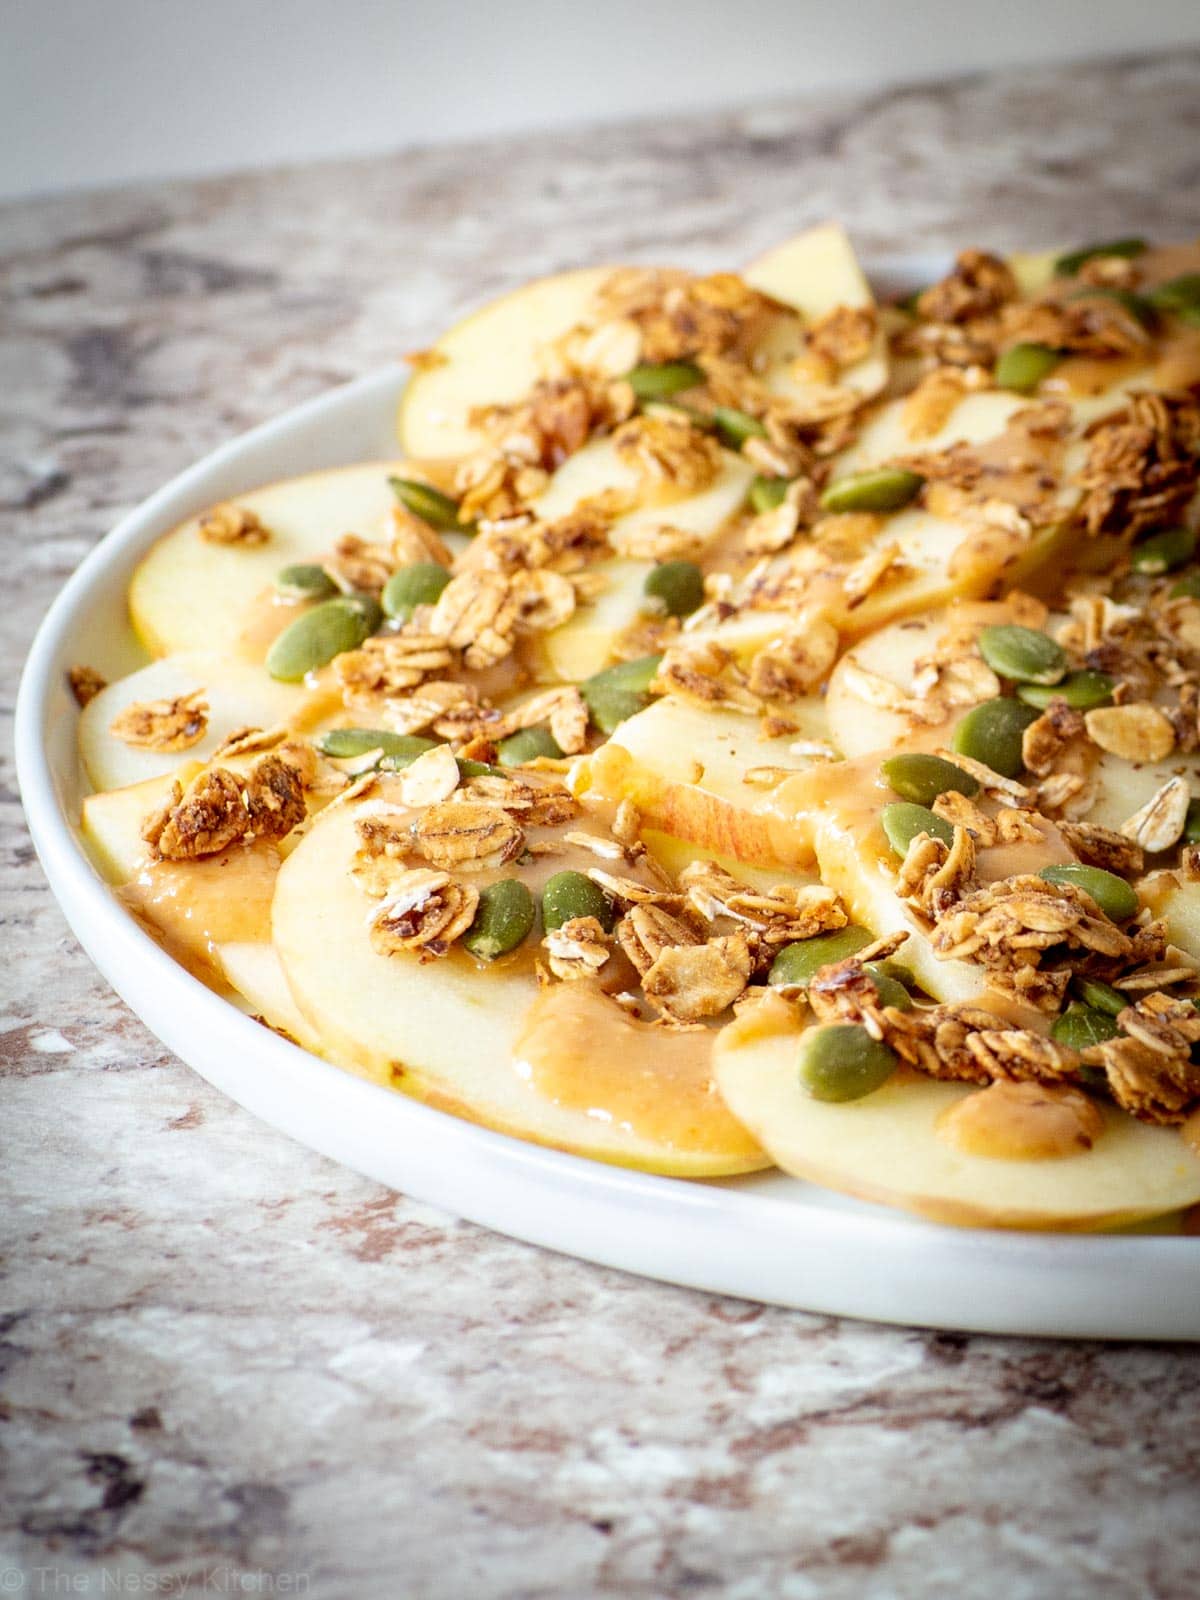 Plate of thinly sliced apples topped with nut butter, granola and pumpkin seeds.